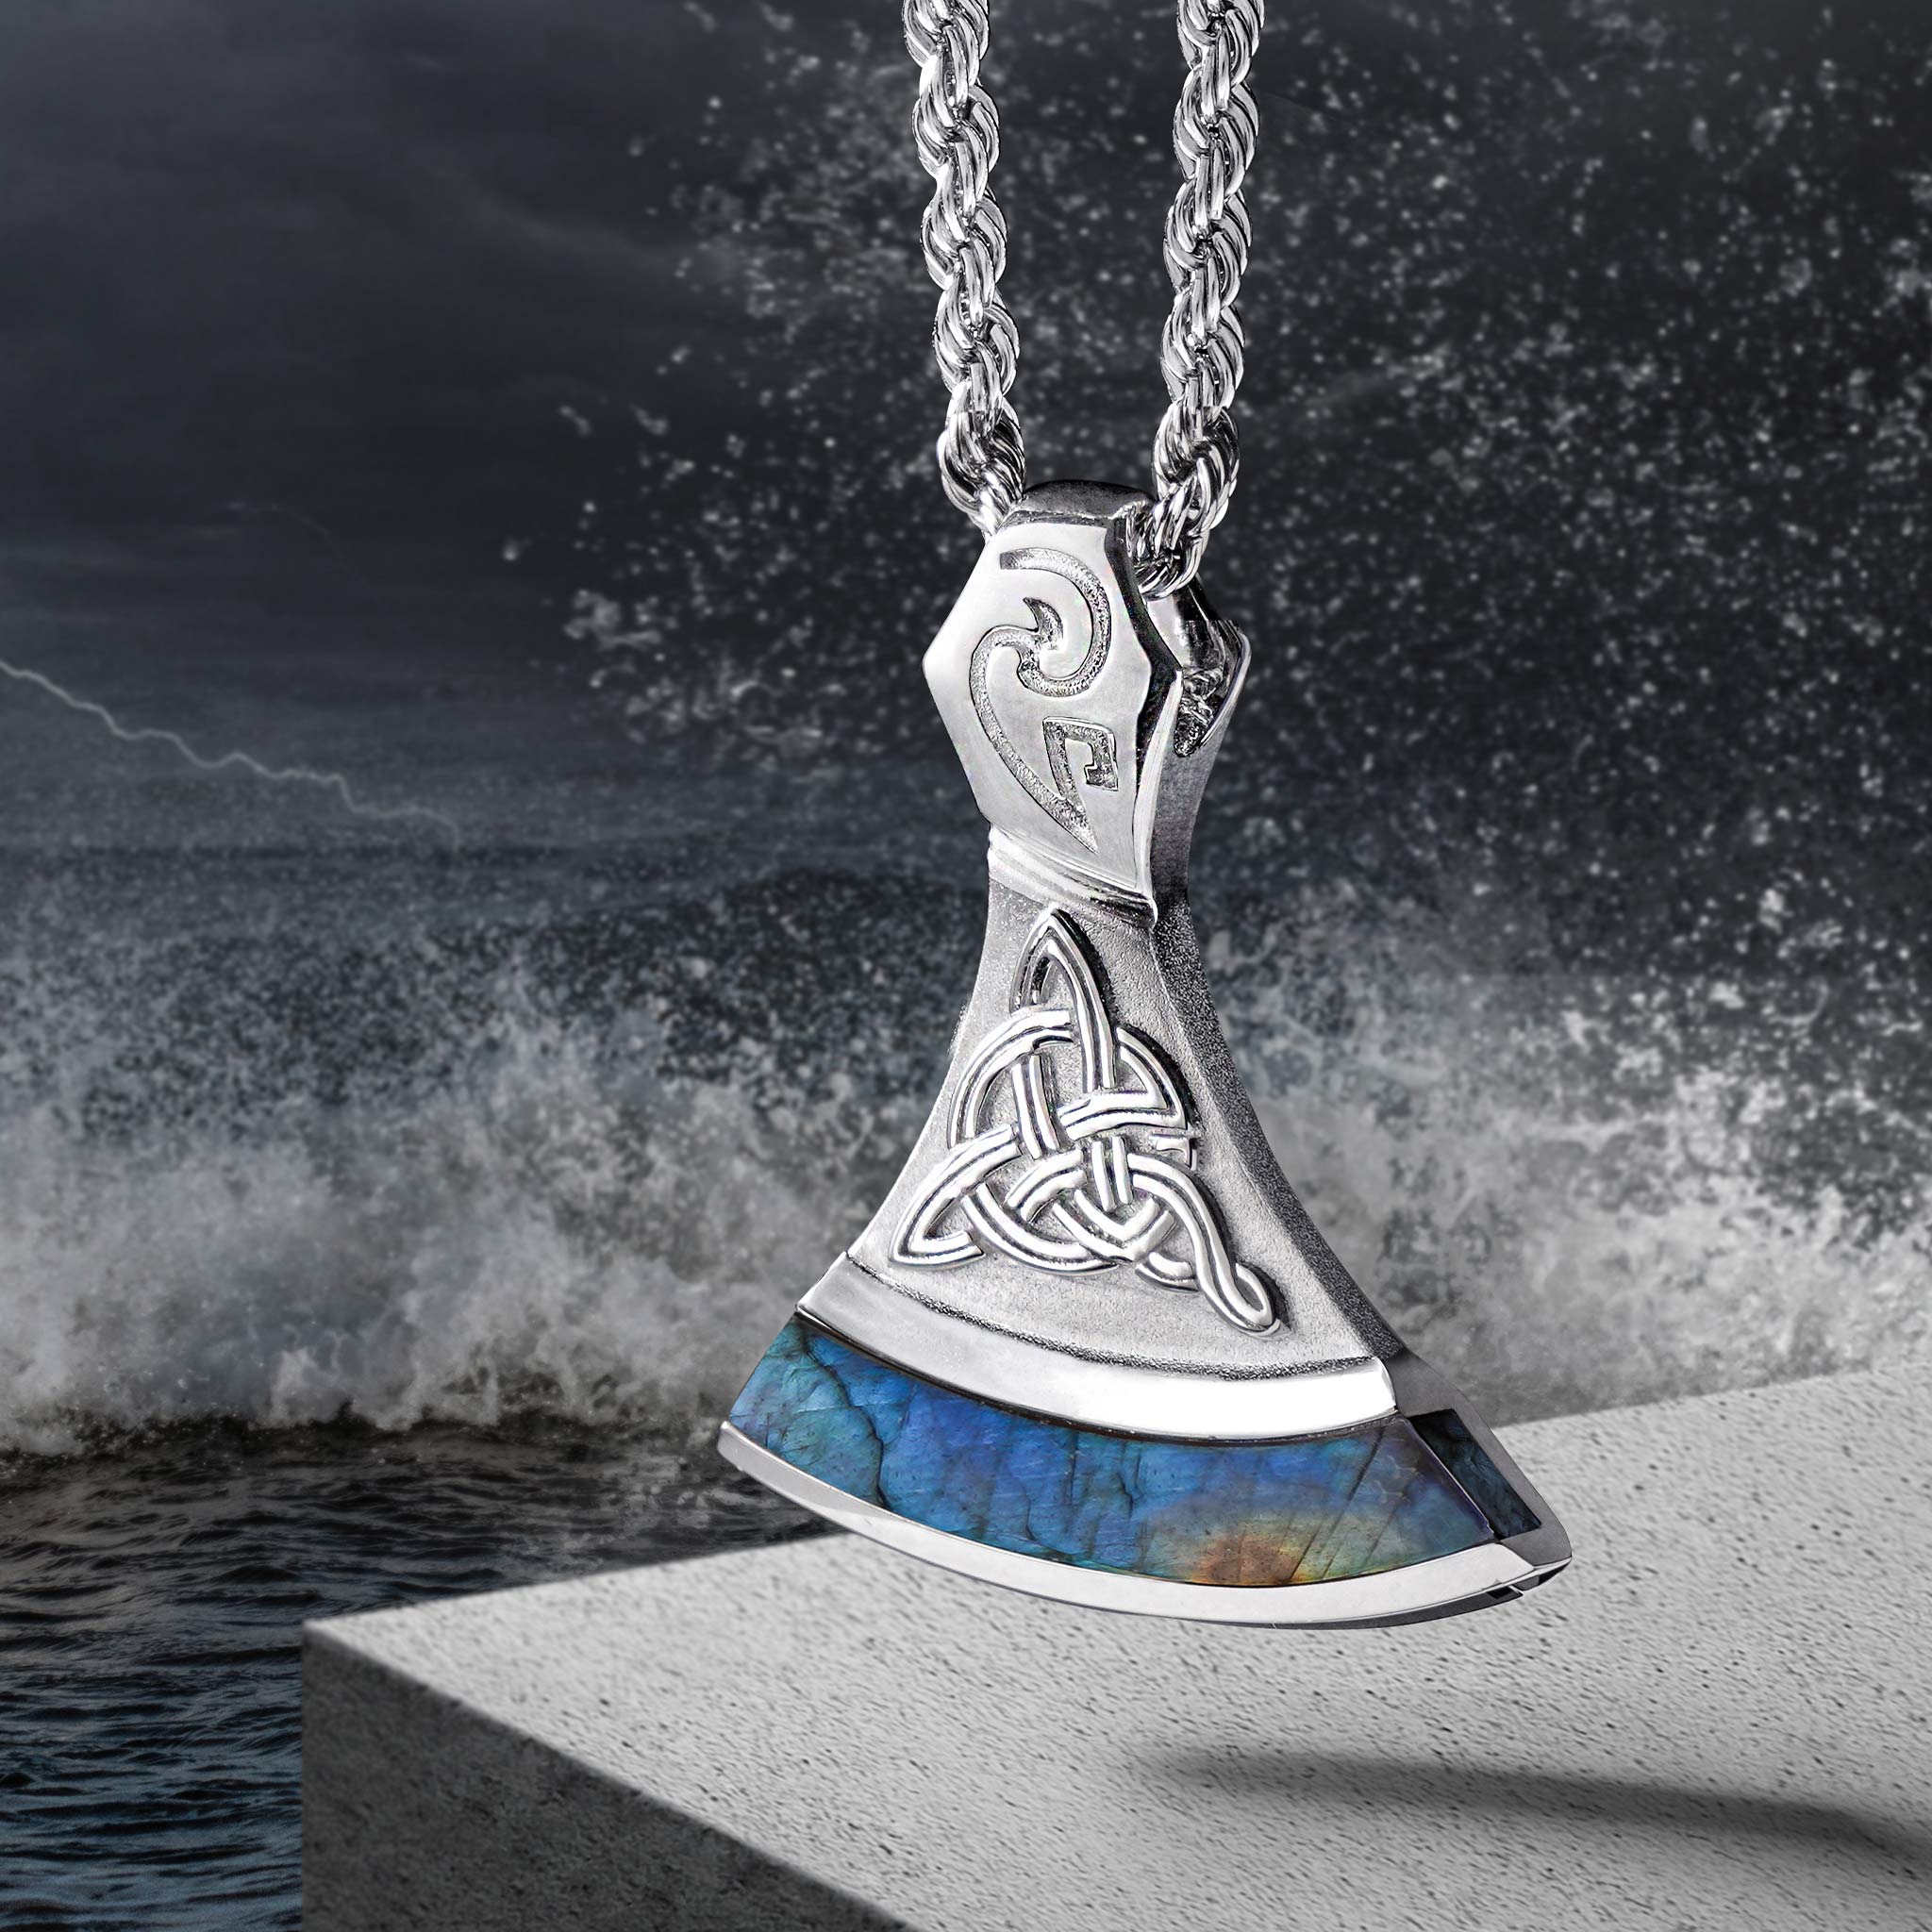 Men's Tomahawk Necklace with Spectrolite Necklaces WAA FASHION GROUP 